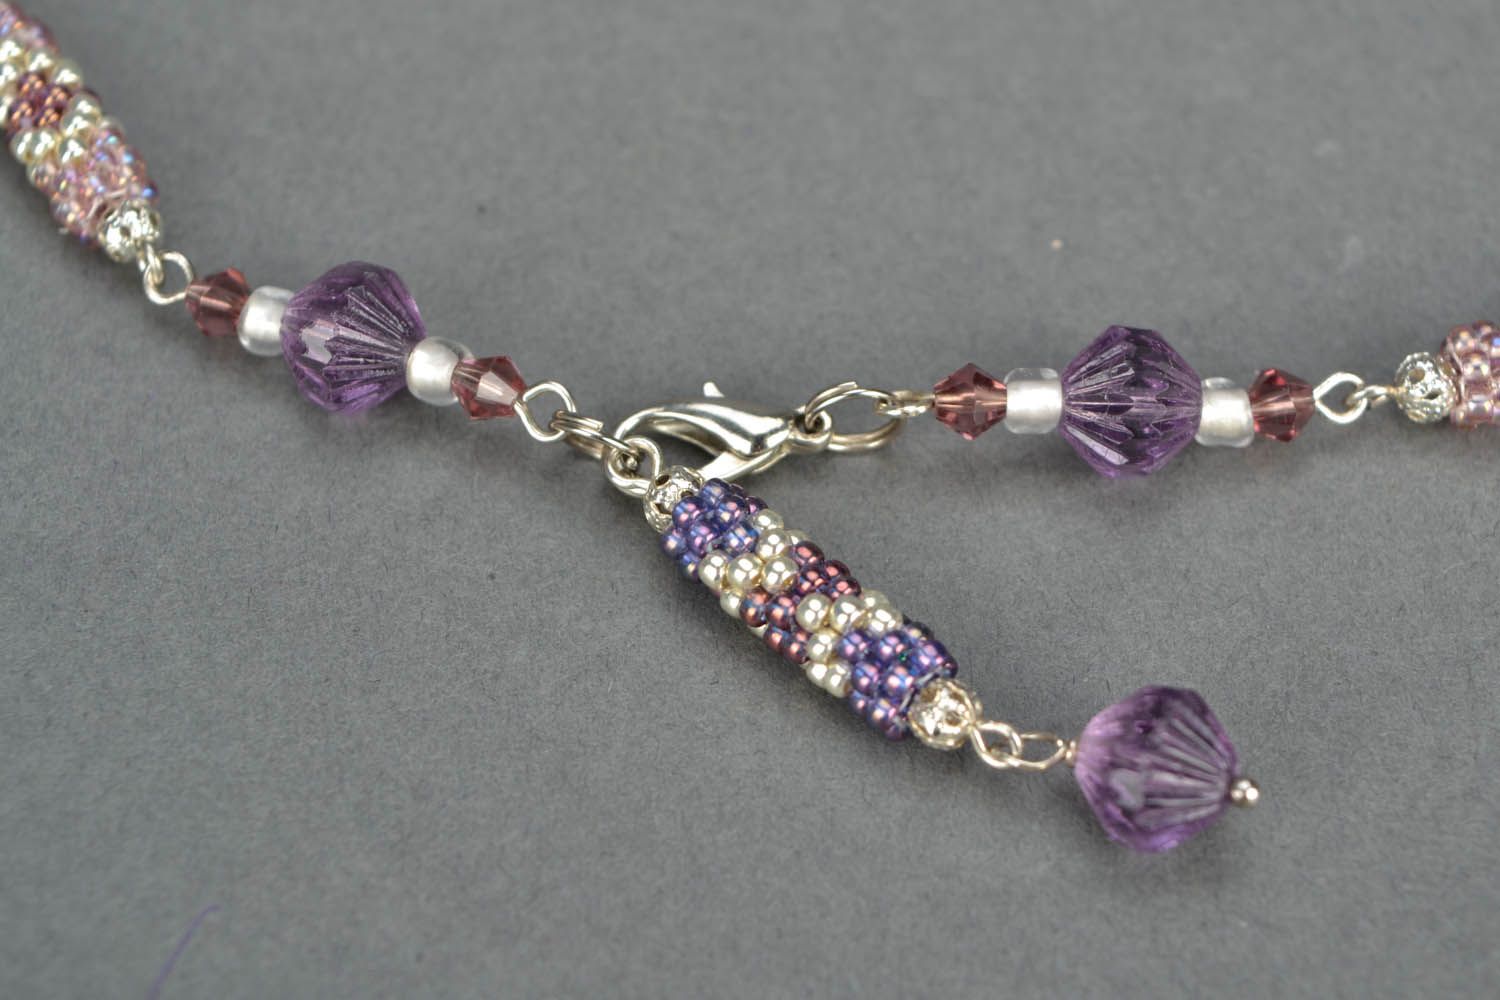 Necklet made of beads and natural stones photo 5